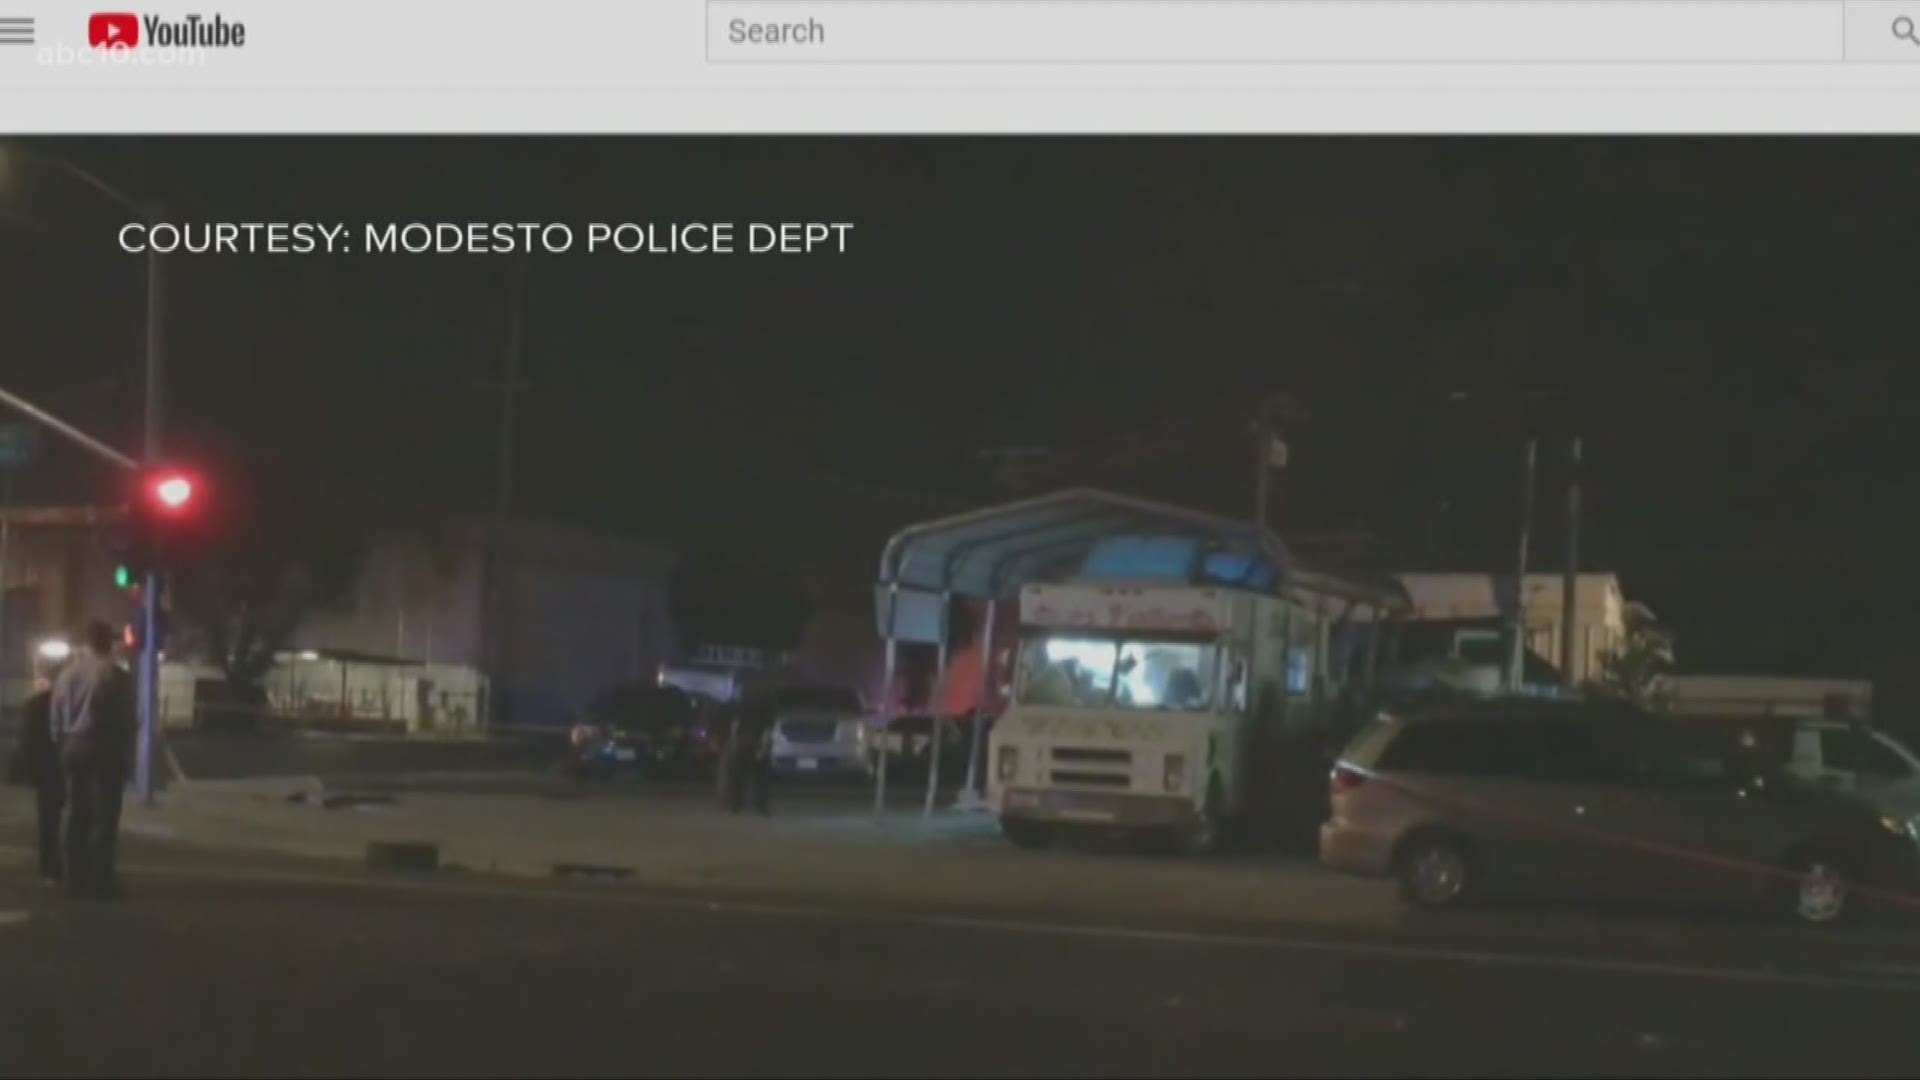 Two men in a stolen vehicle led Modesto Police on a high-speed chase Saturday, shooting at officers just minutes after they attempted to pull them over.